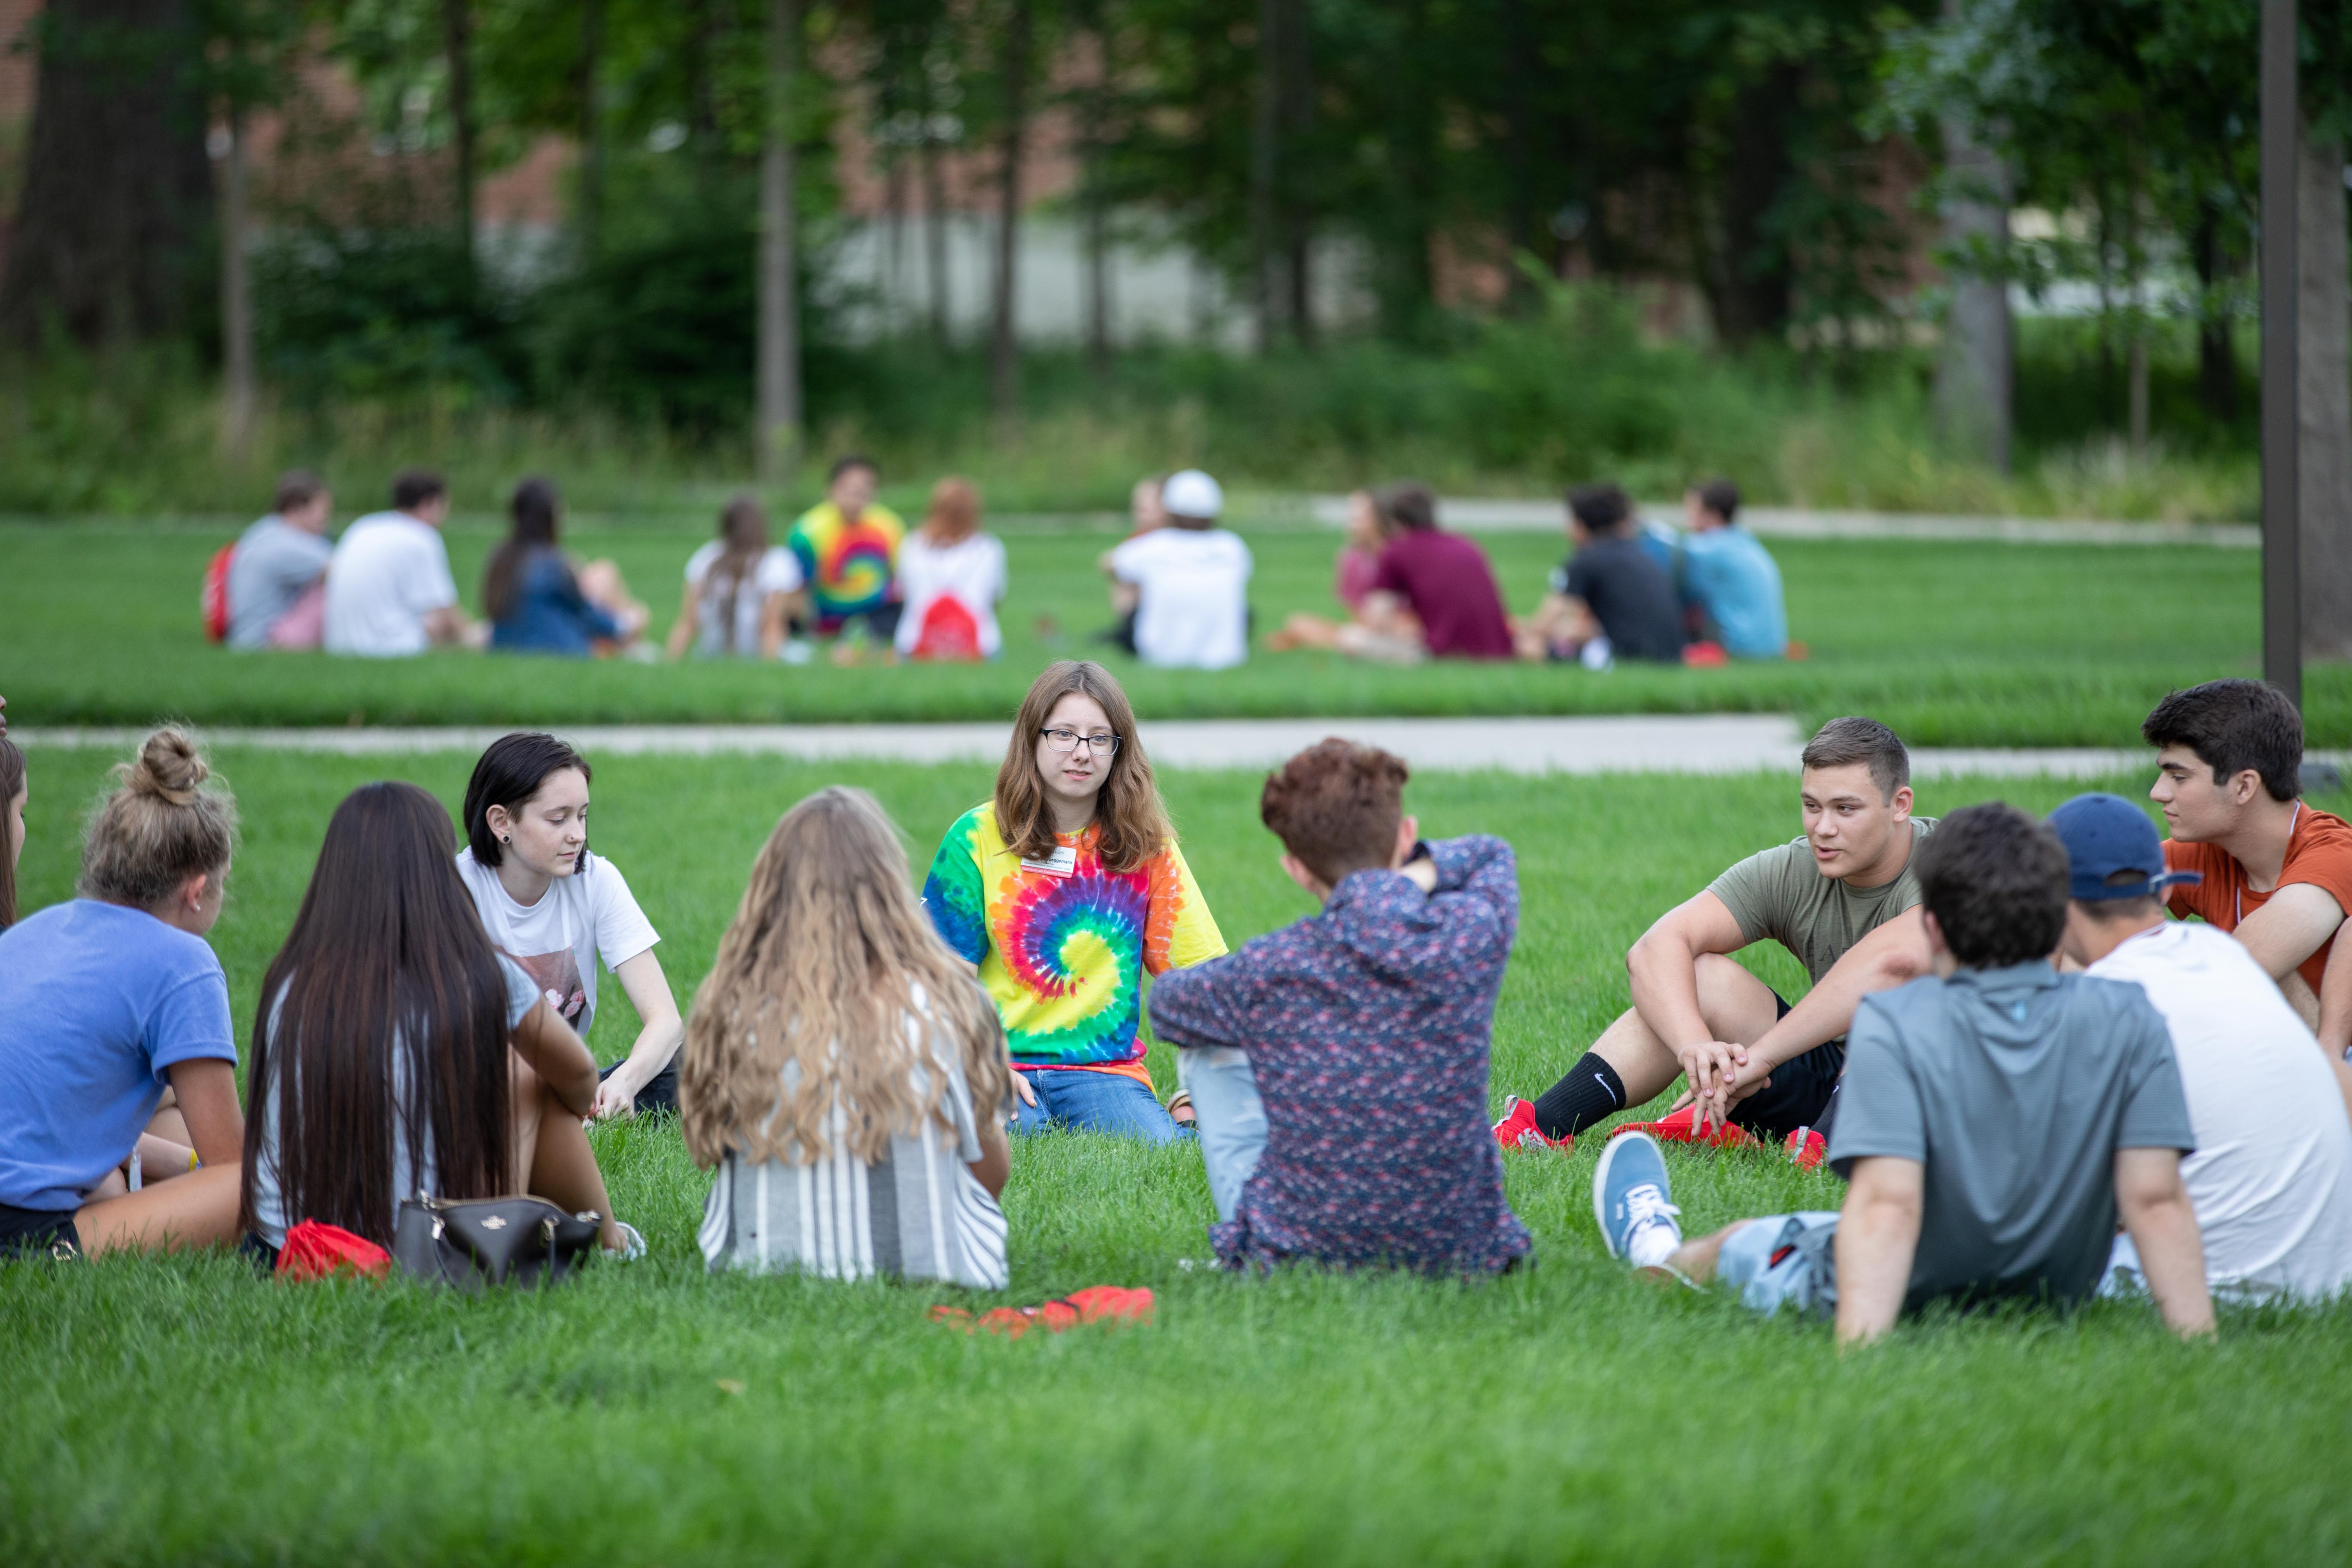 Two groups of about 15 students sitting in circles on a grassy area of campus for orientation.